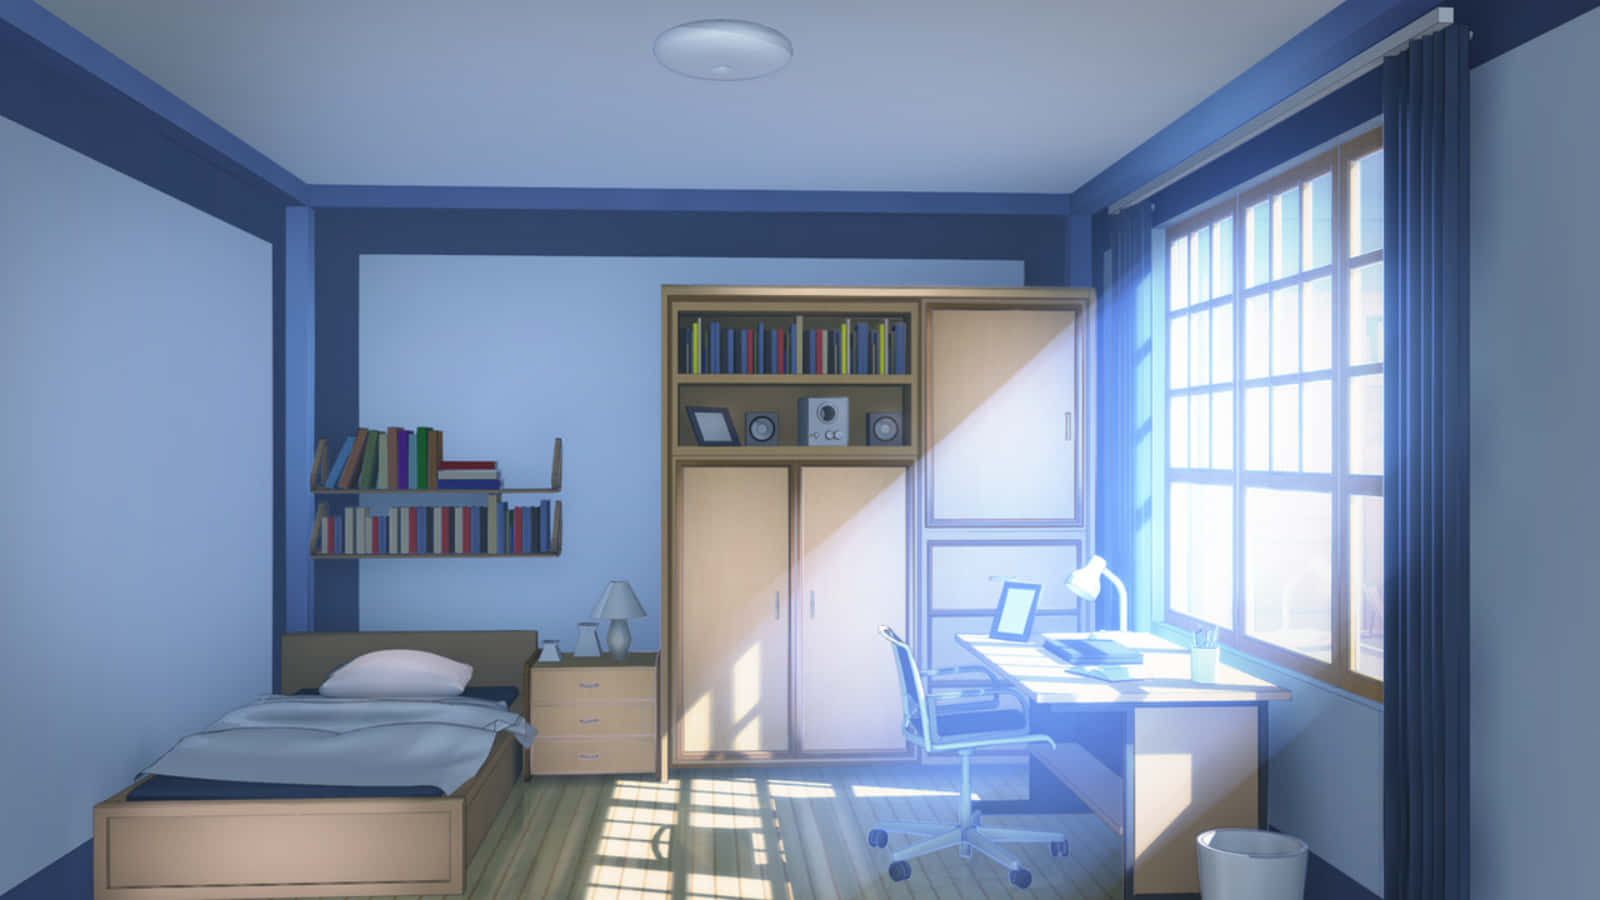 A Room With A Bed, Desk And A Window